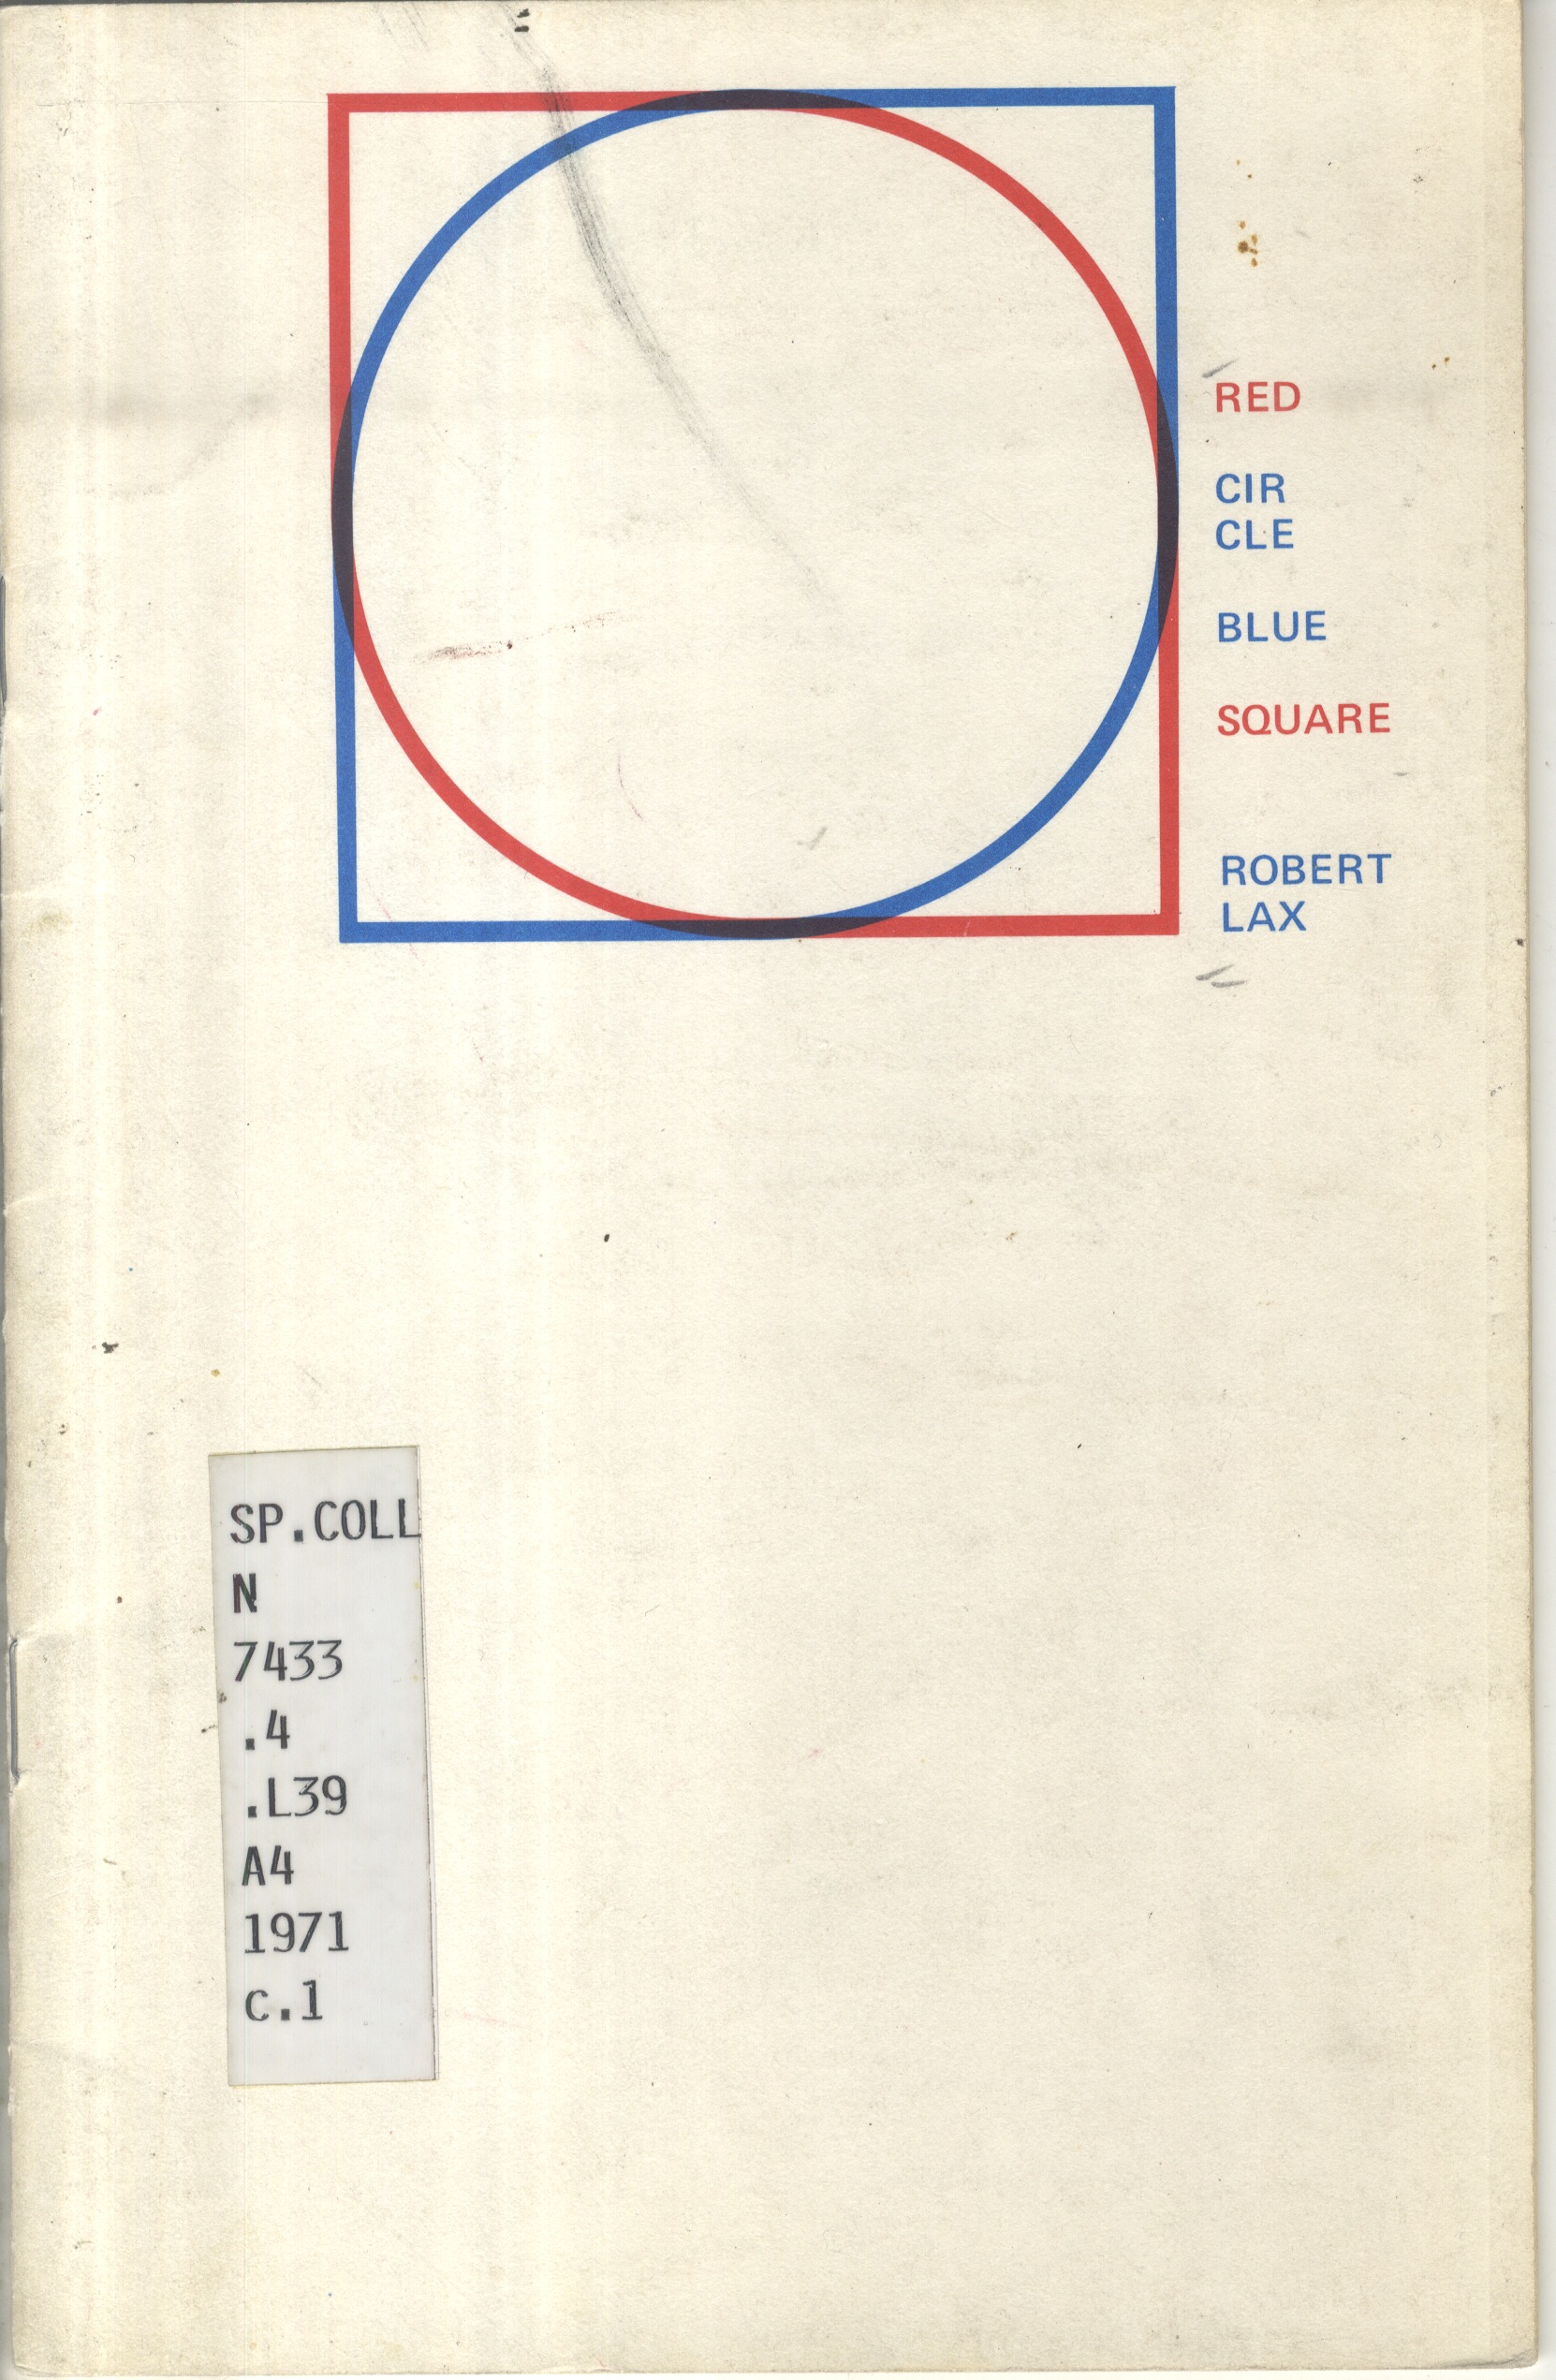 Square with red and blue digonal corners, circle on top of the square with red and blue digonal quaters on a off-white book cover and title on the side